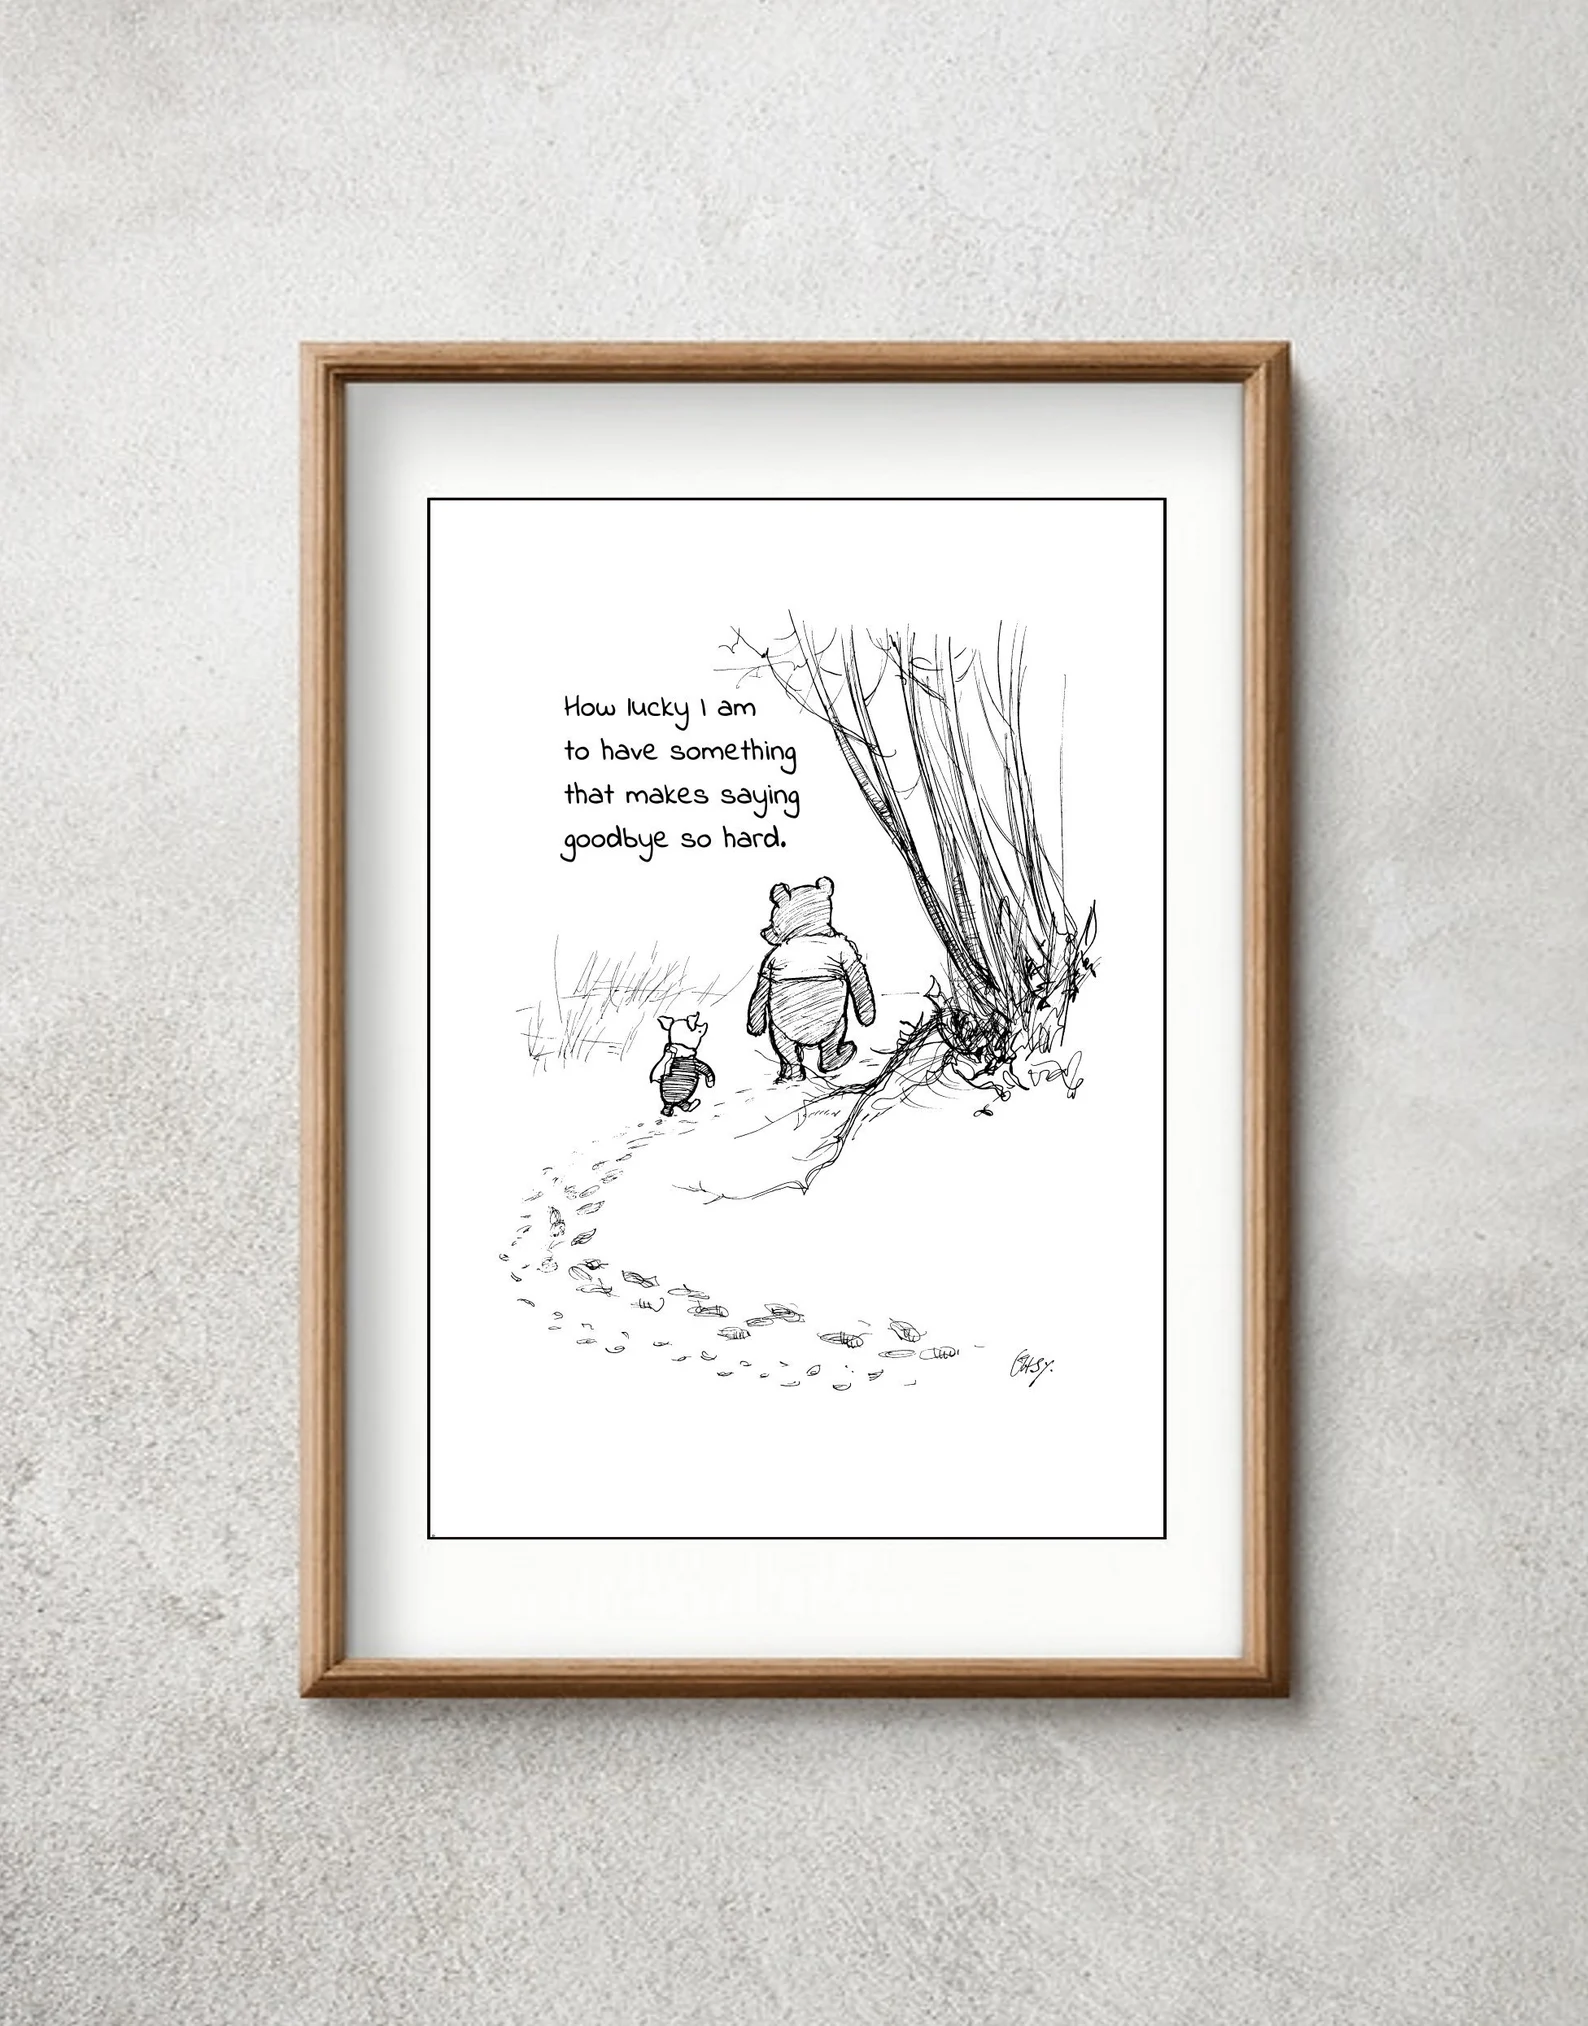 framed image of a winnie the pooh quote